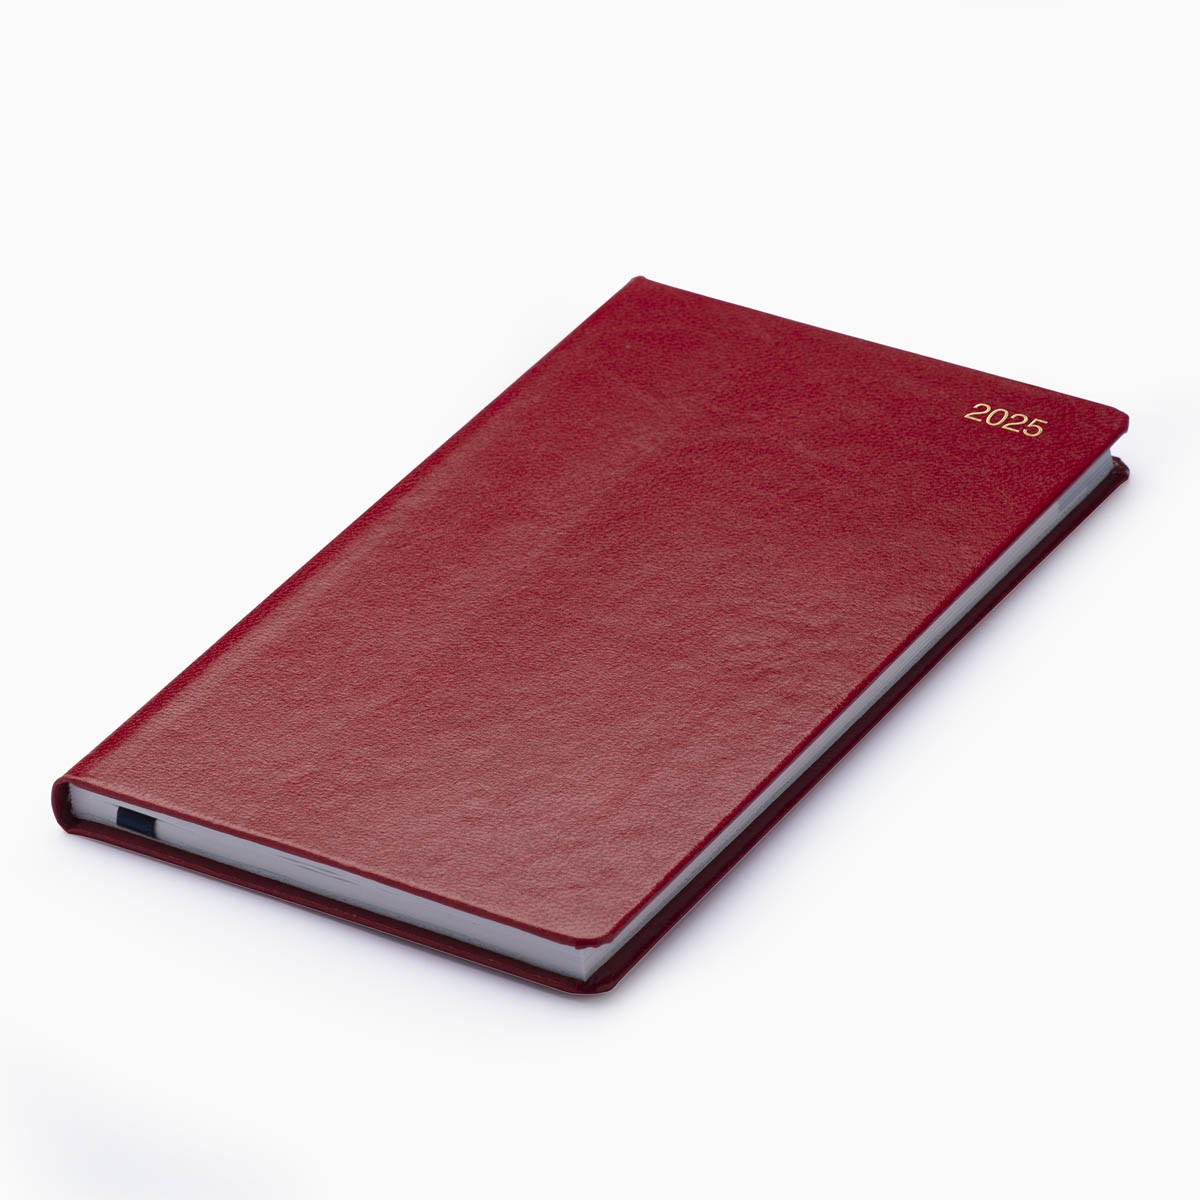 Strata Pocket Diary - White Pages